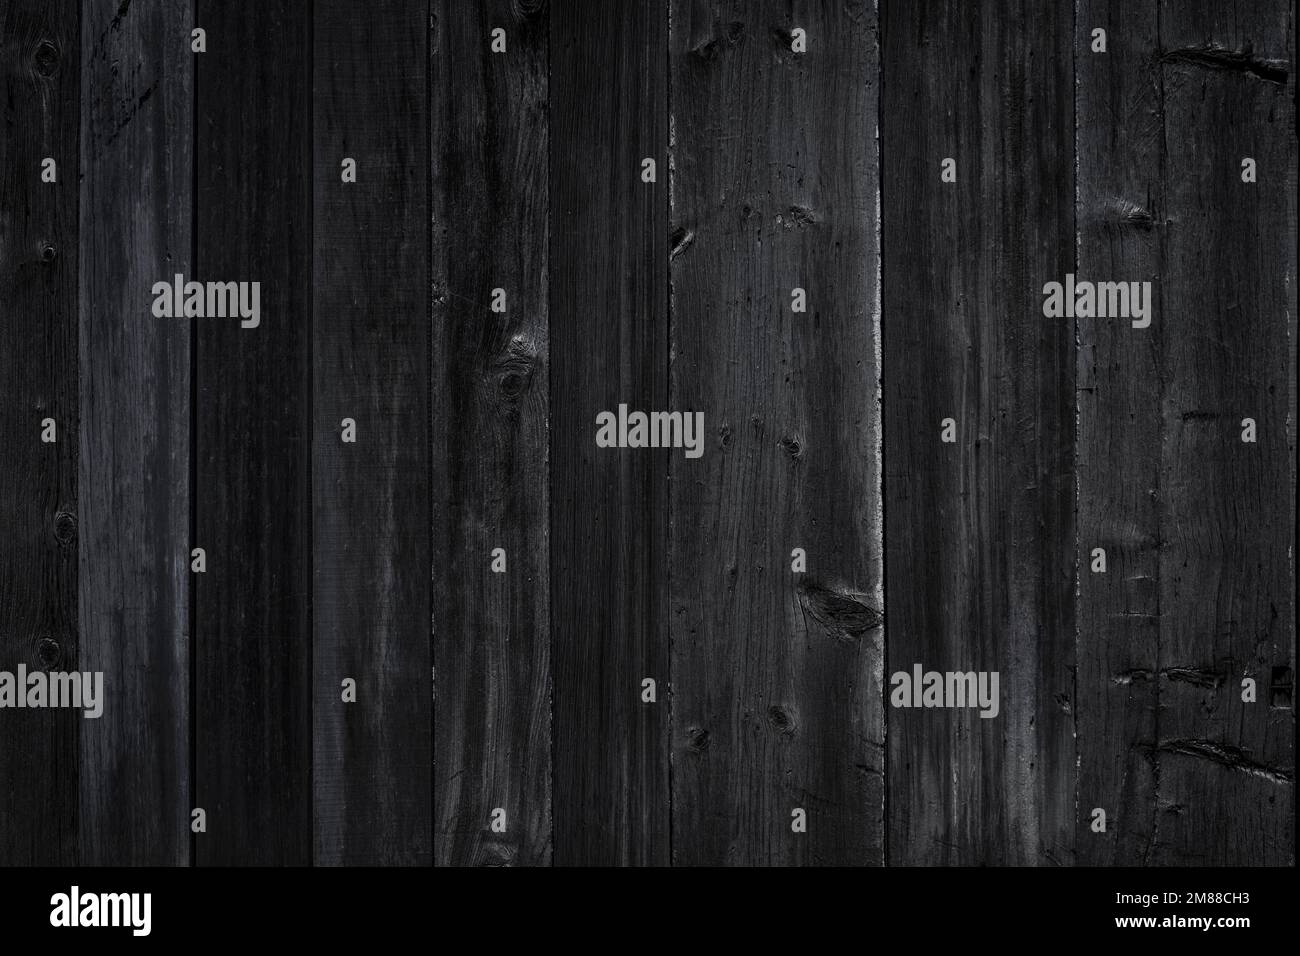 Black wooden planks background wall. Textured black rustic wood old dark paneling for walls, interiors and construction. High quality photo Stock Photo